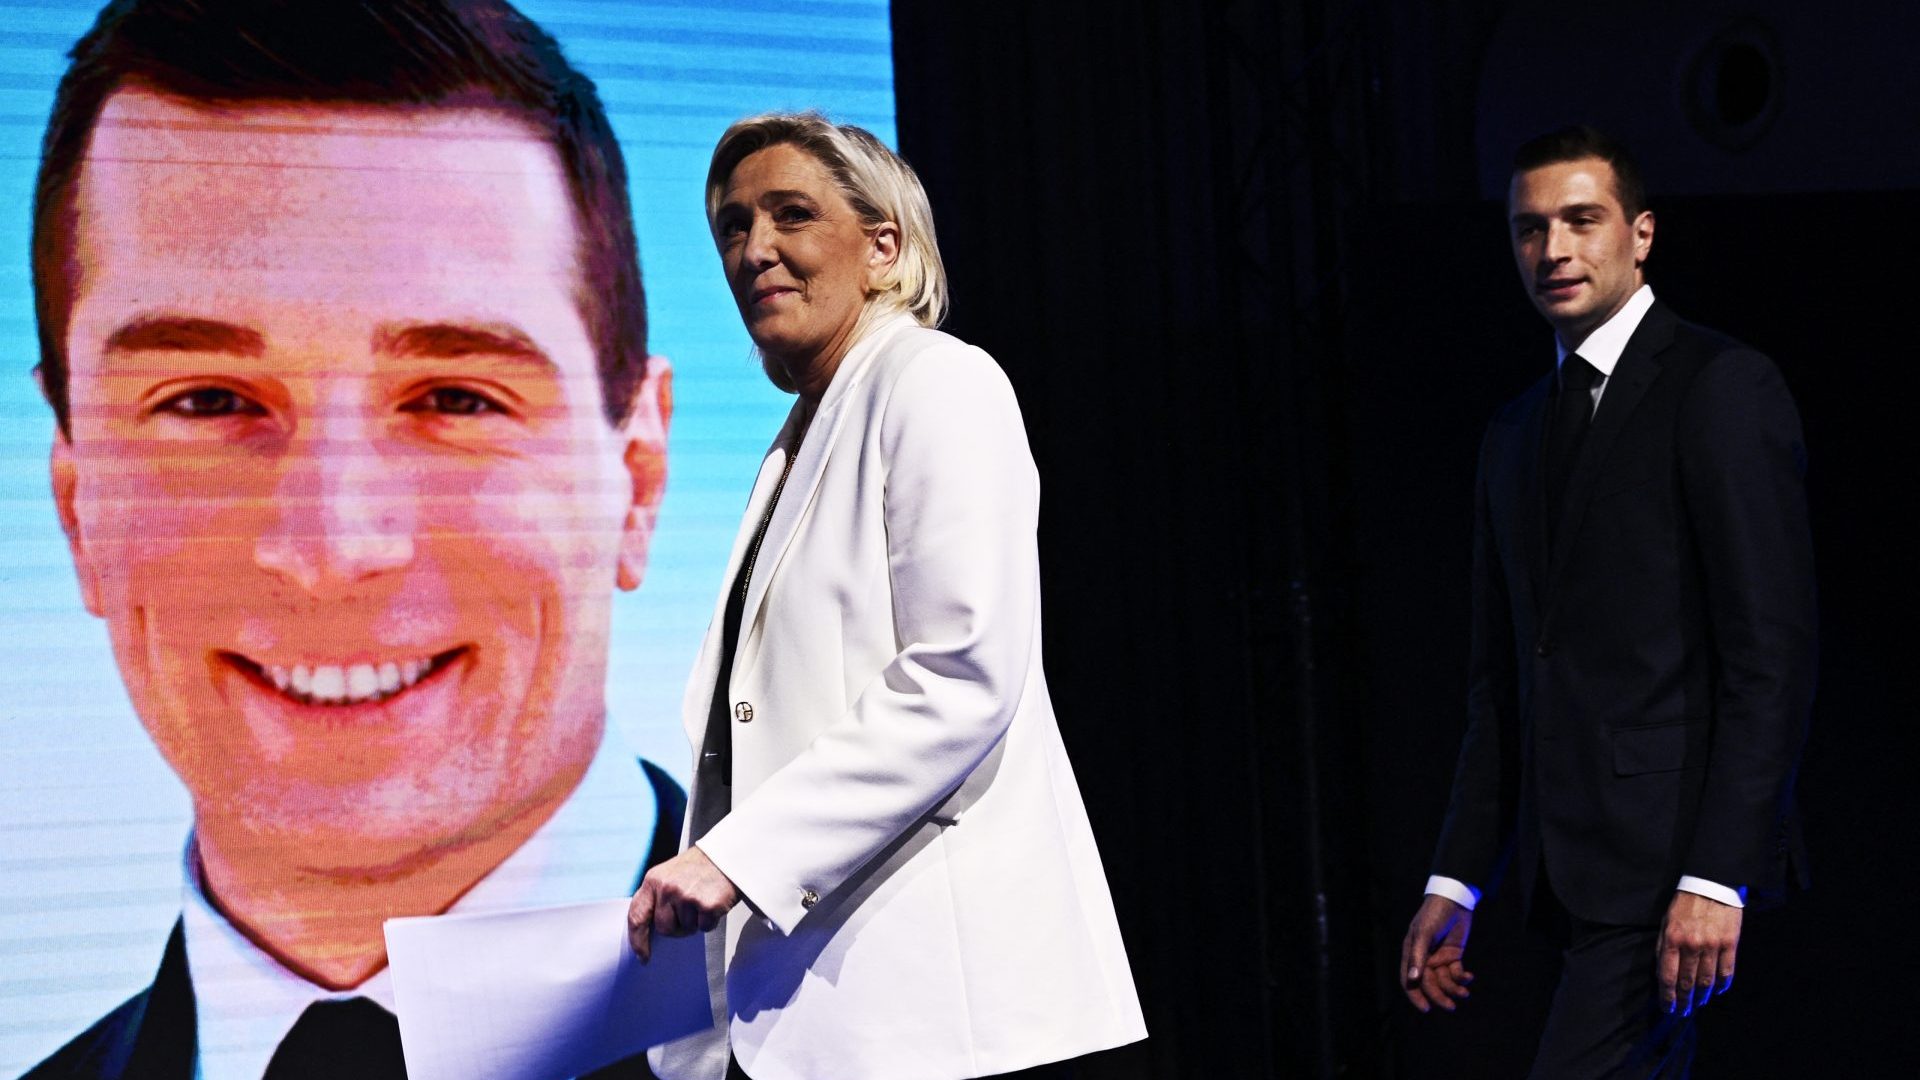 French far-right Rassemblement National leader Marine Le Pen arrives to address party members after Emmanuel Macron called a snap election on June 30. Photo: Julien de Rosa/AFP/Getty